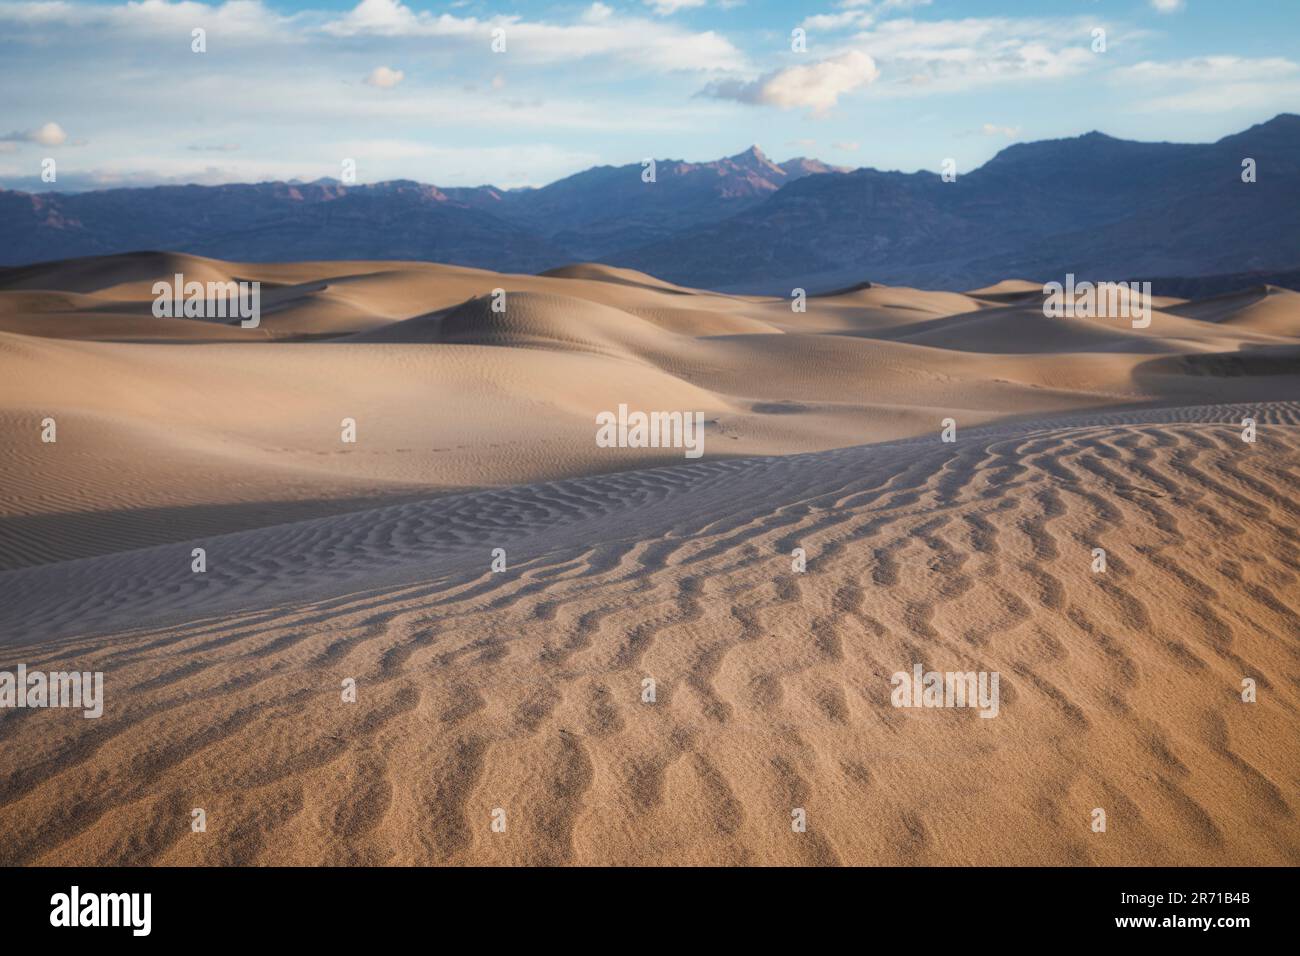 Early morning at the Mesquite Flat Sand Dunes in Death Valley, California. Stock Photo